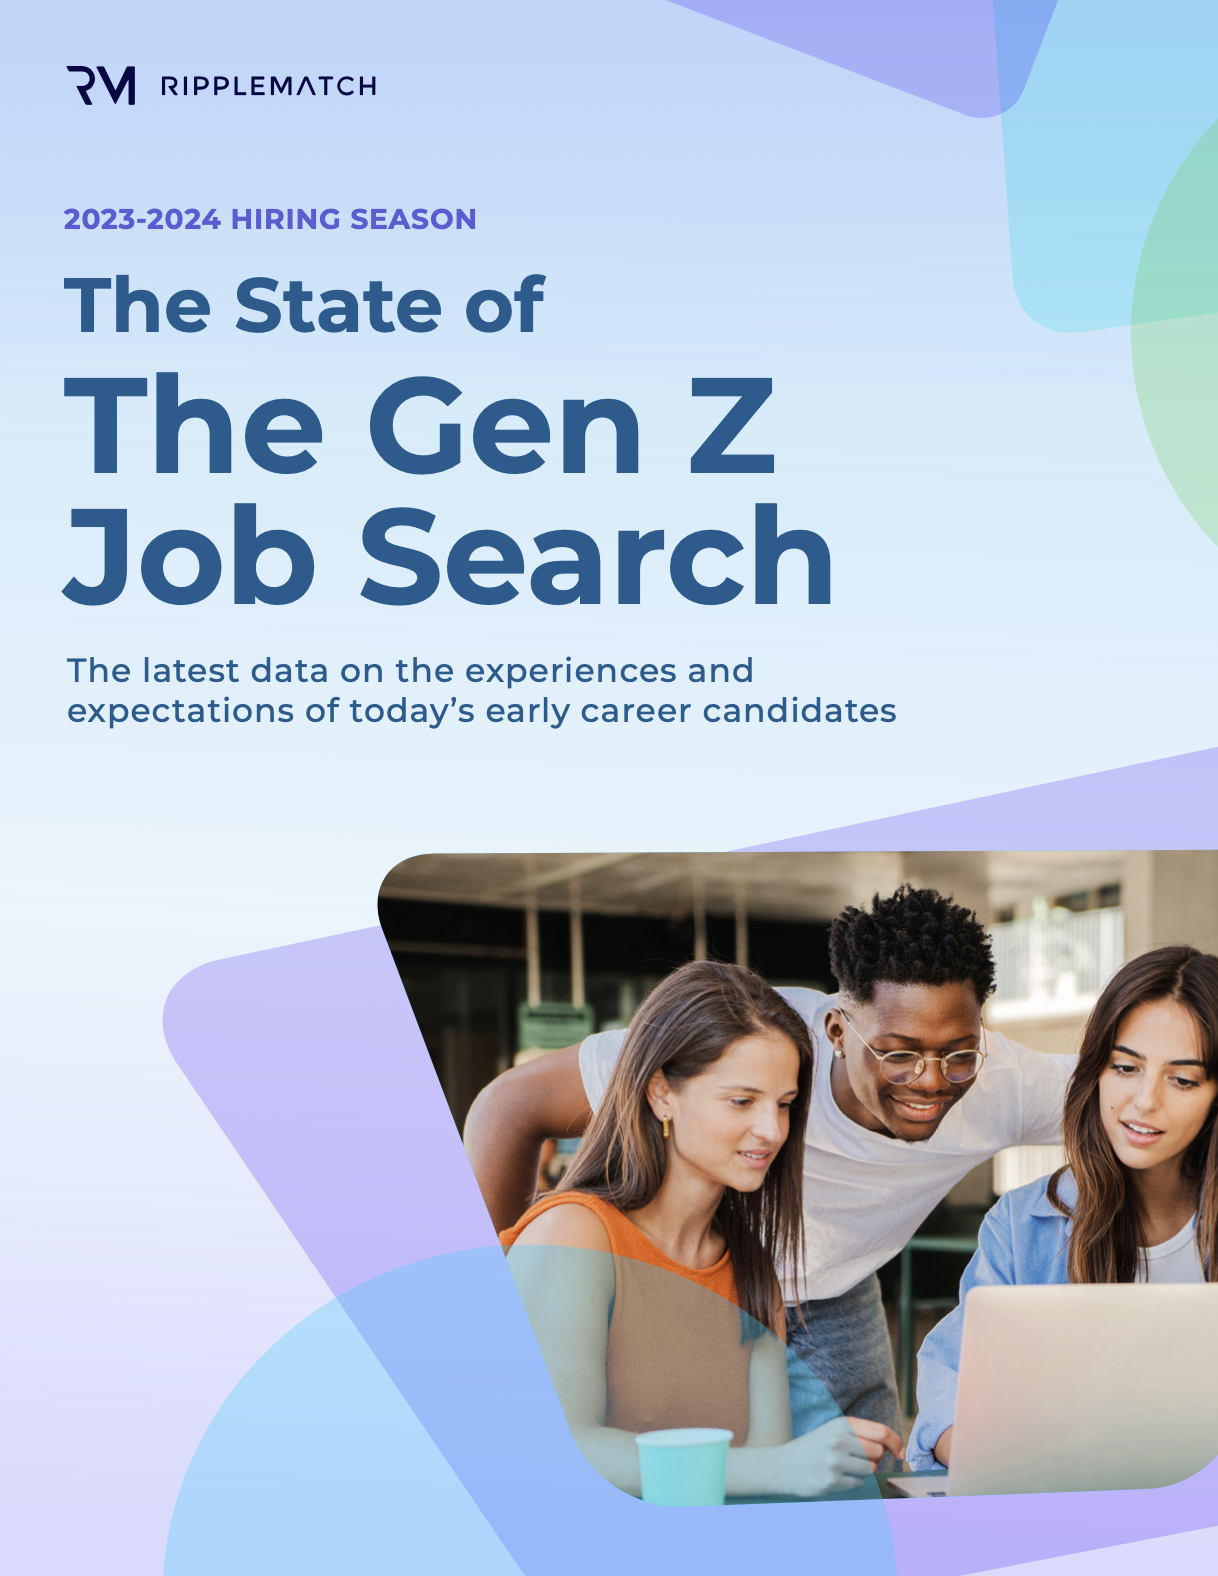 The State of the Gen Z Job Search